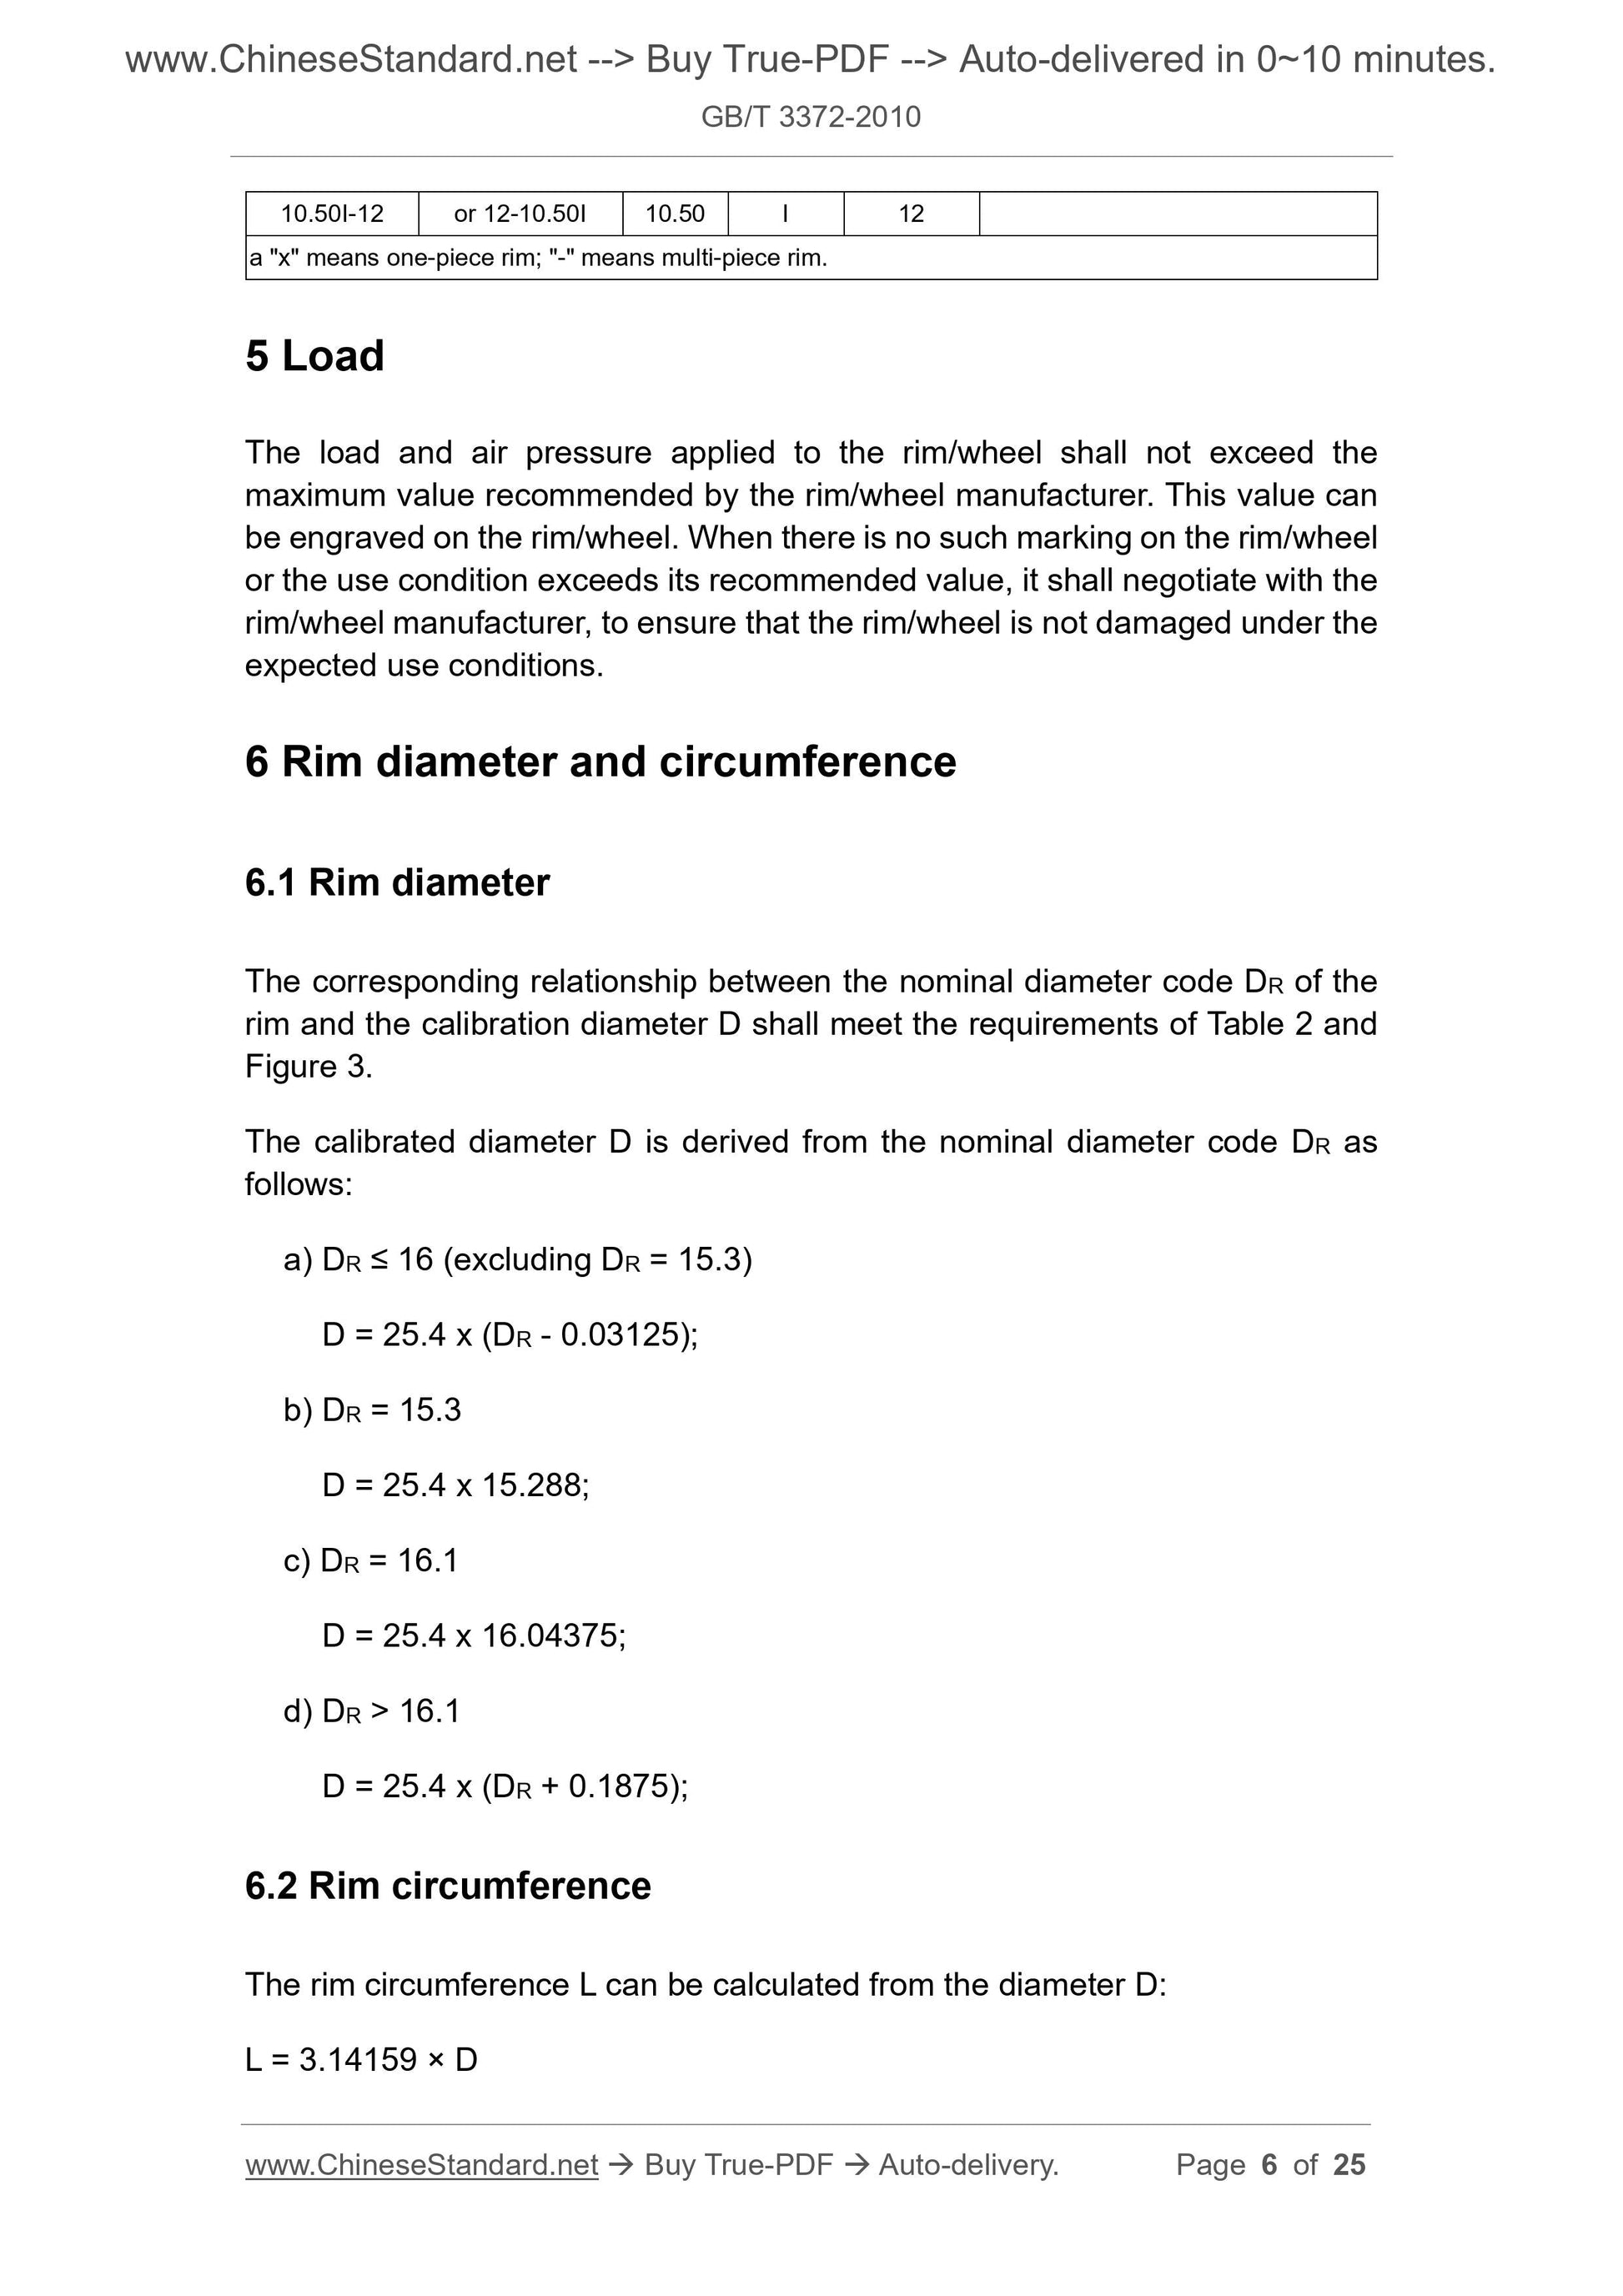 GB/T 3372-2010 Page 6